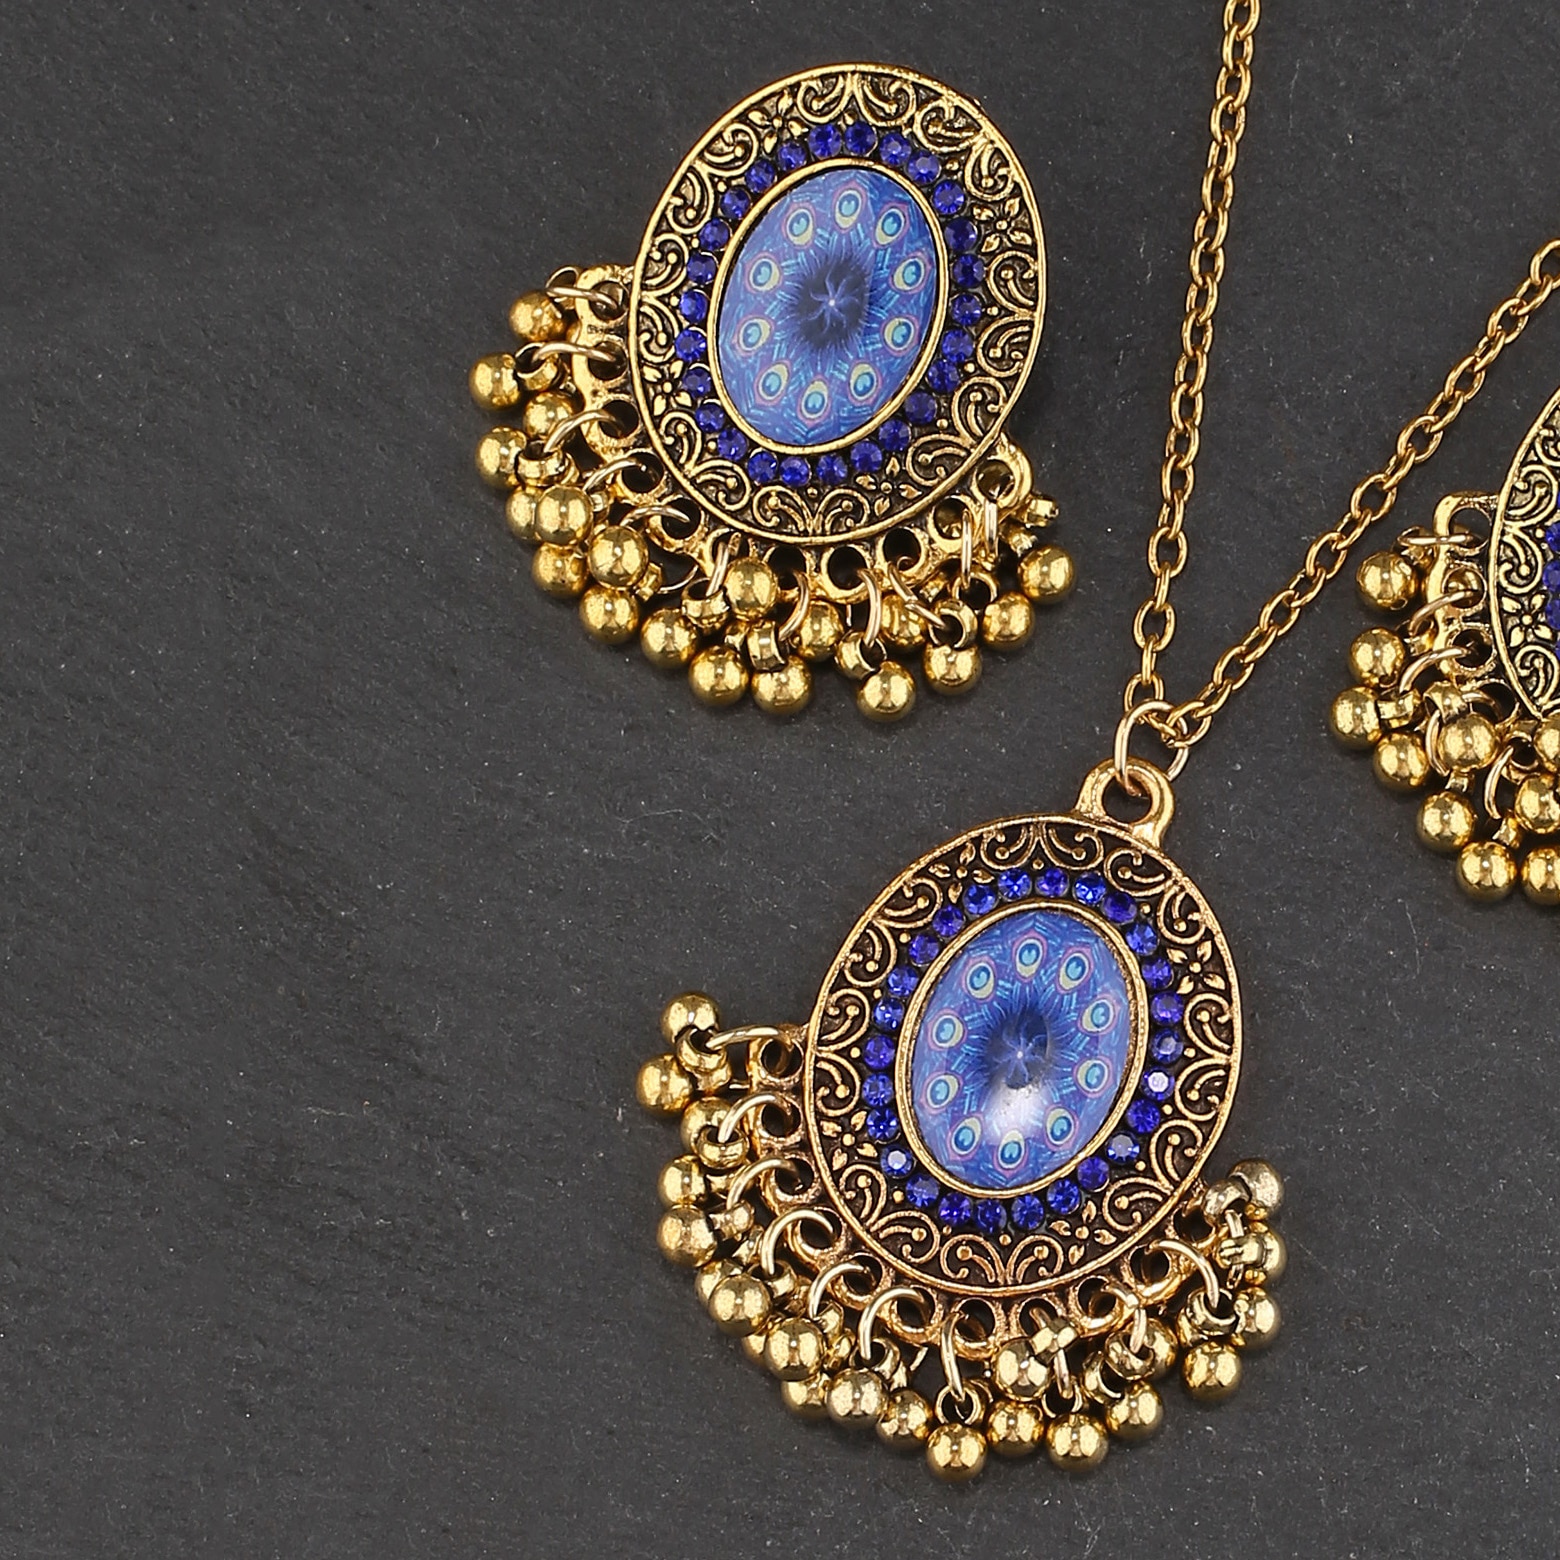 Afghan-Vintage-Tribal-Blue-Flower-Statement-Necklace-Earring-Jewelry-Sets-Gold-Color-Indian-Chain-Ne-1005004536385713-3